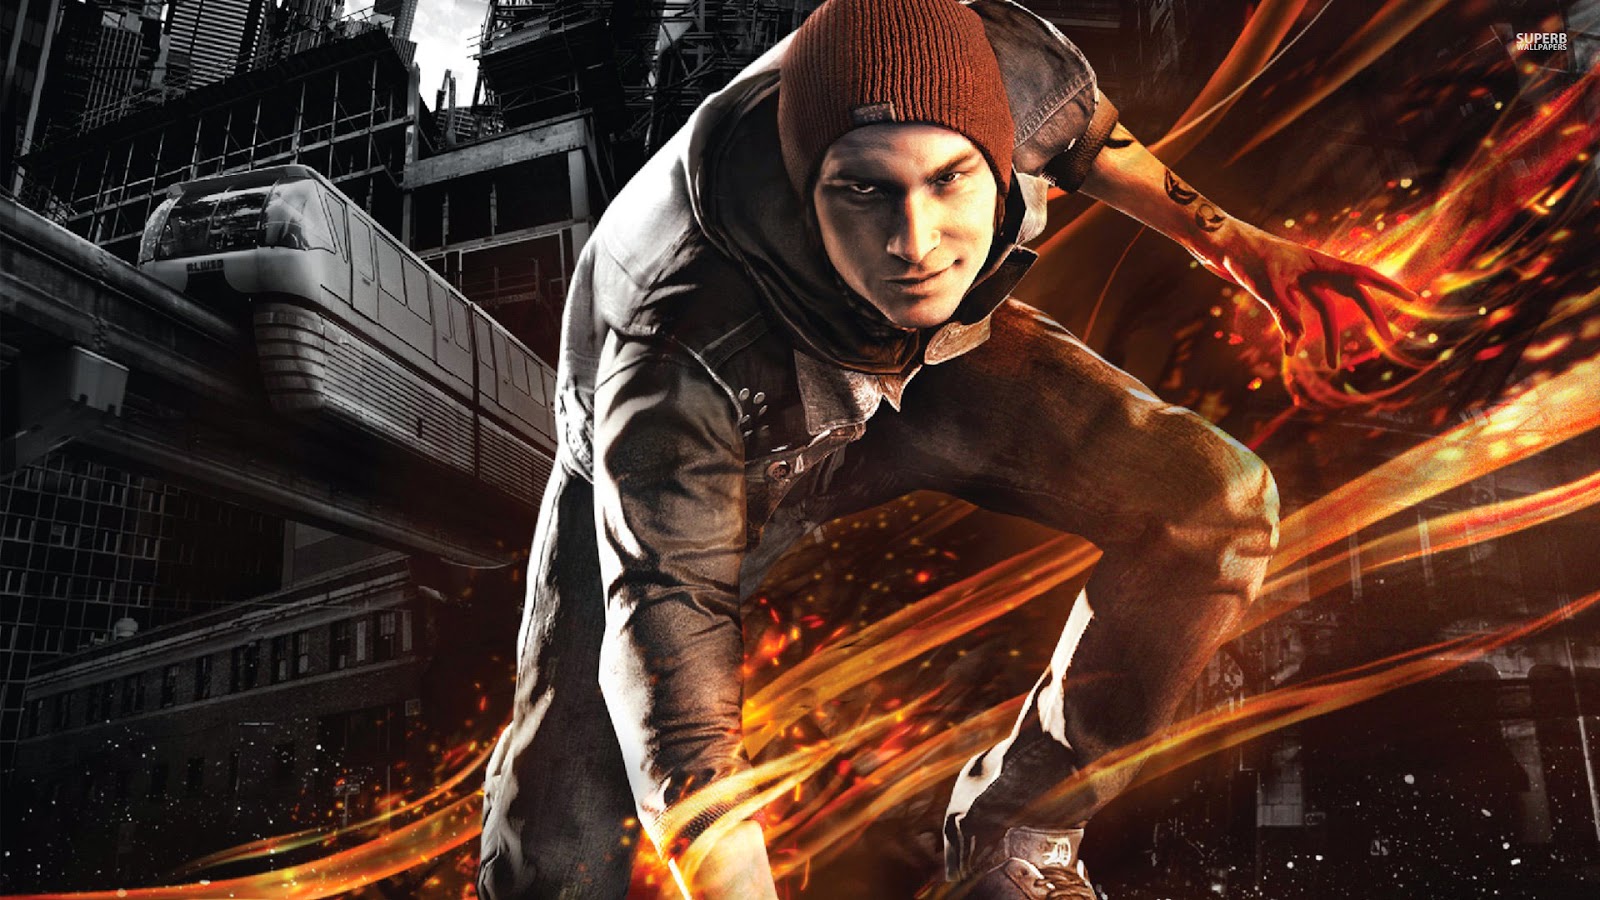 infamous second son wallpaper,action adventure game,pc game,cg artwork,fictional character,movie